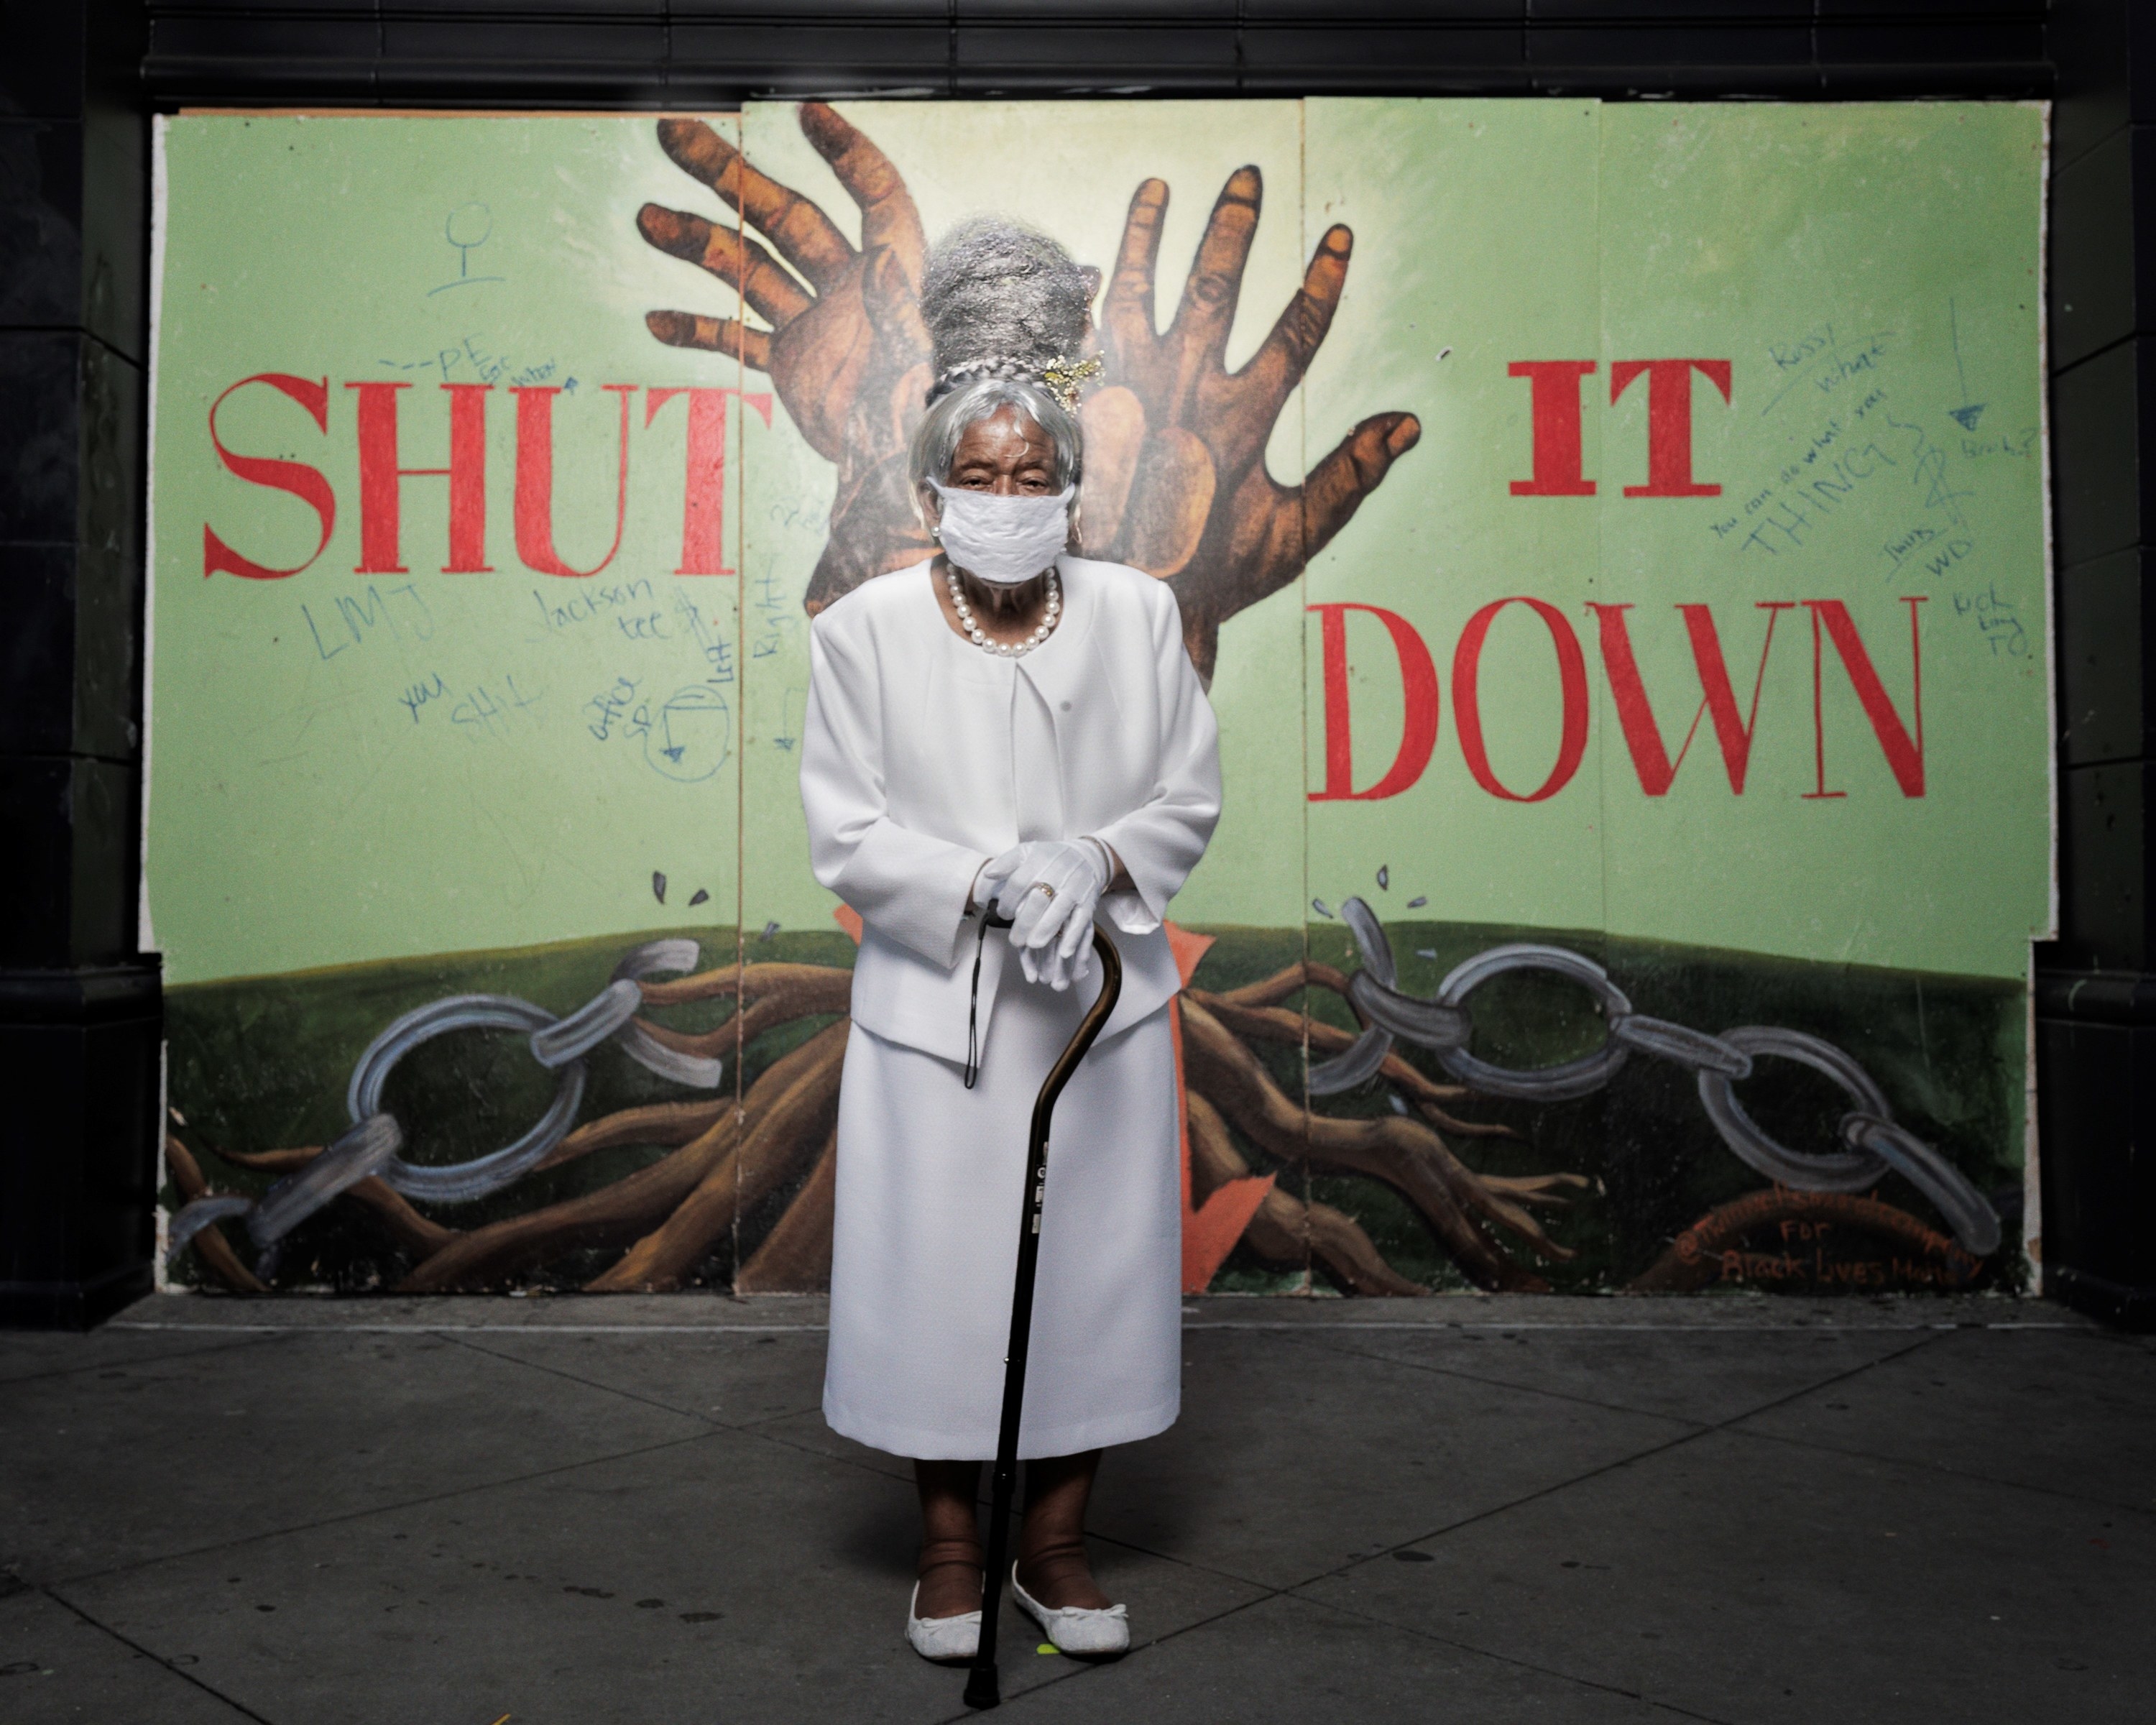 An older woman with a cane and long coat in front of a mural of hands breaking free from chains